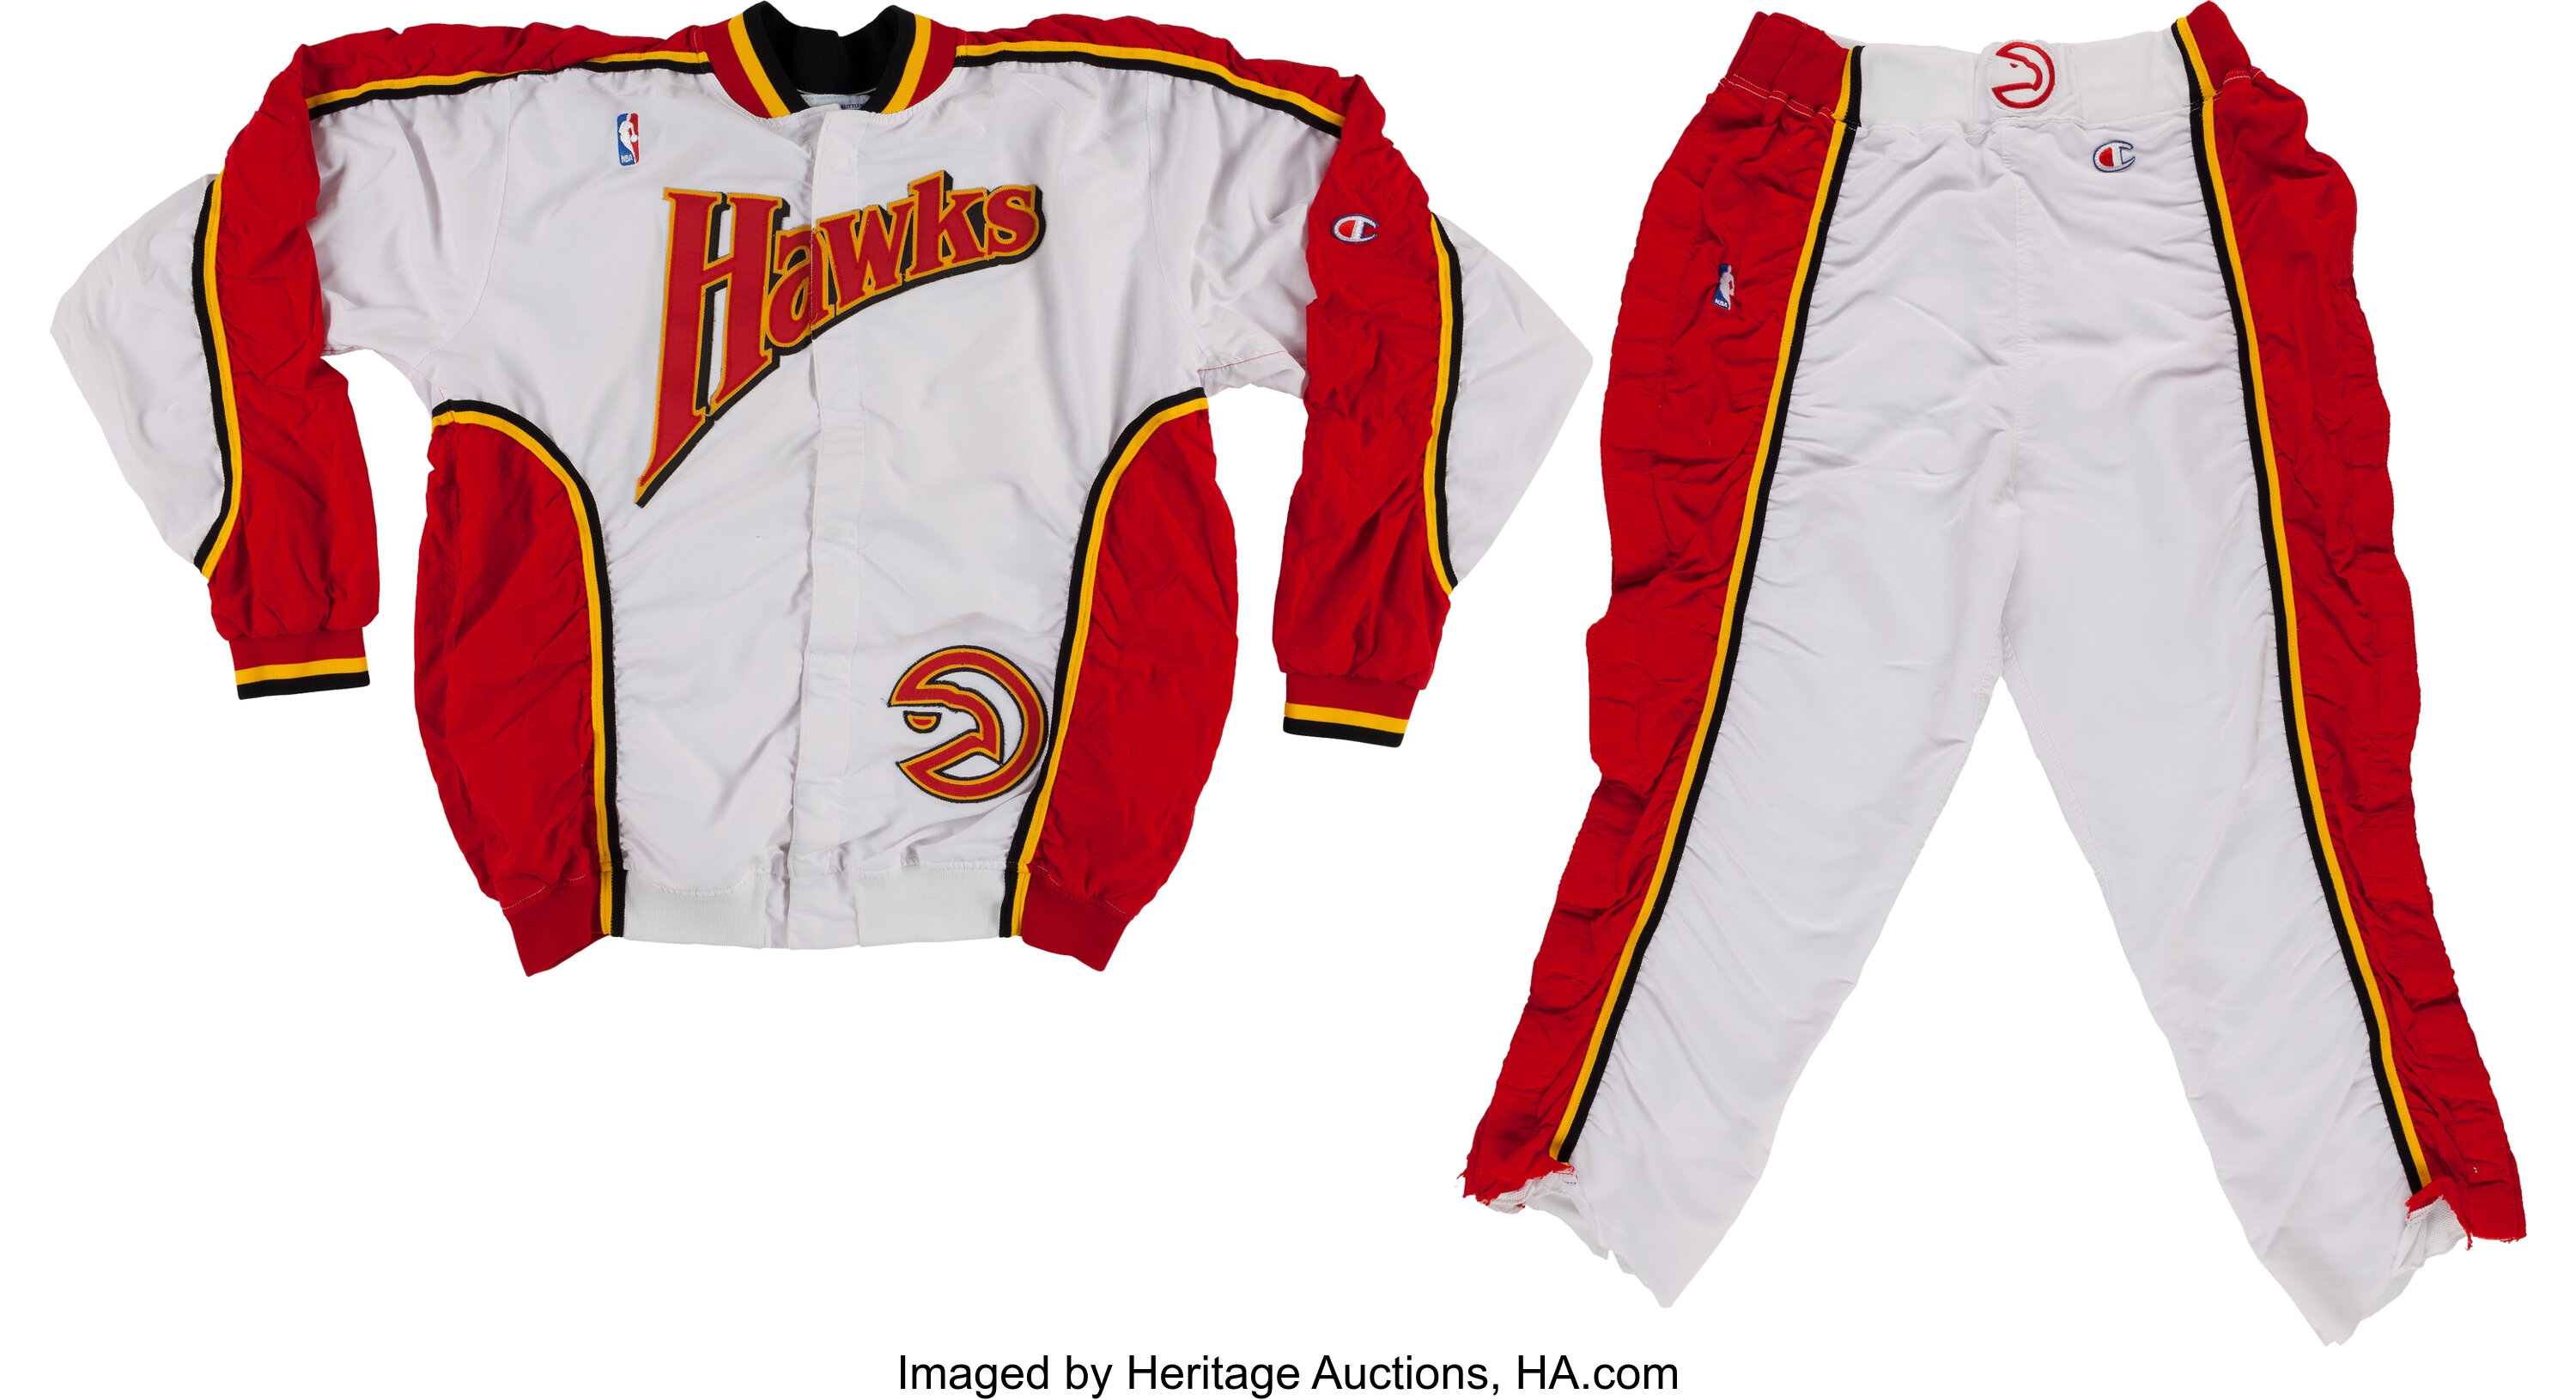 Atlanta Hawks on X: A uniform years in the making. We are proud